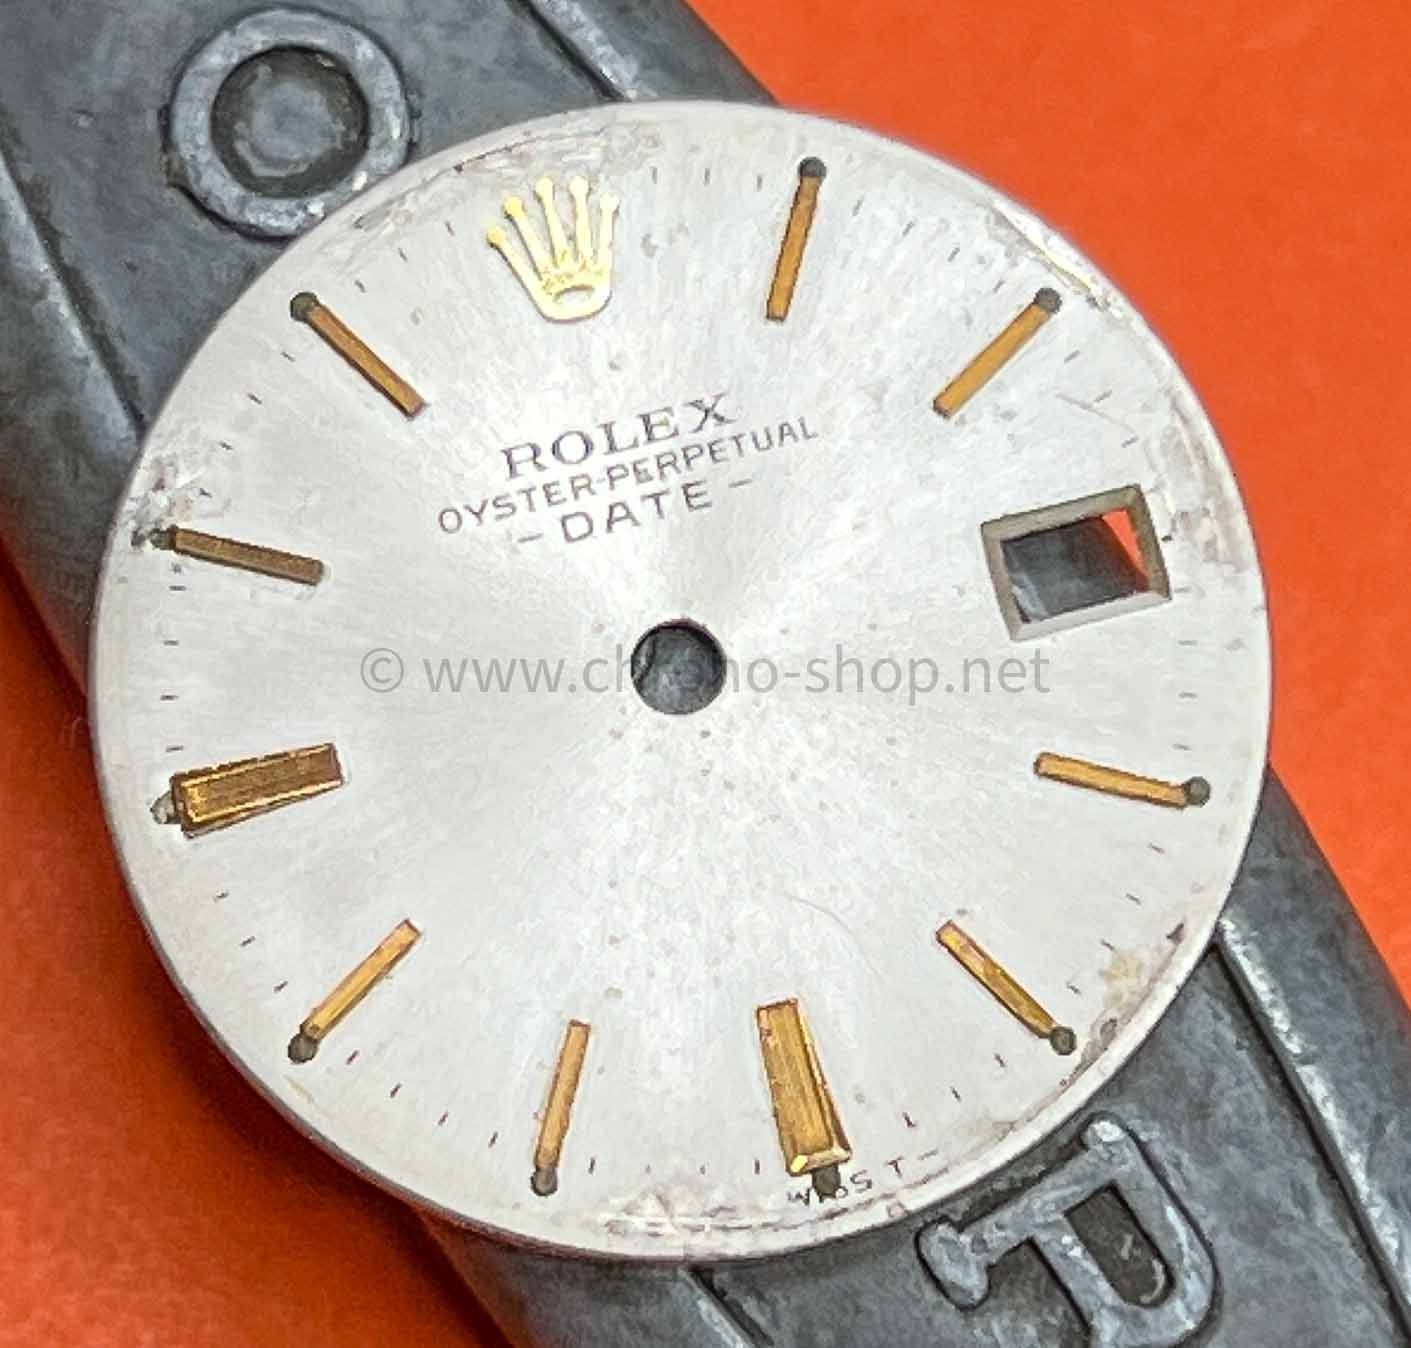 Original Rolex used for repair Ladies OYSTER PERPETUAL DATE BEIGE COLOR w/yellow Watch Dial for sale